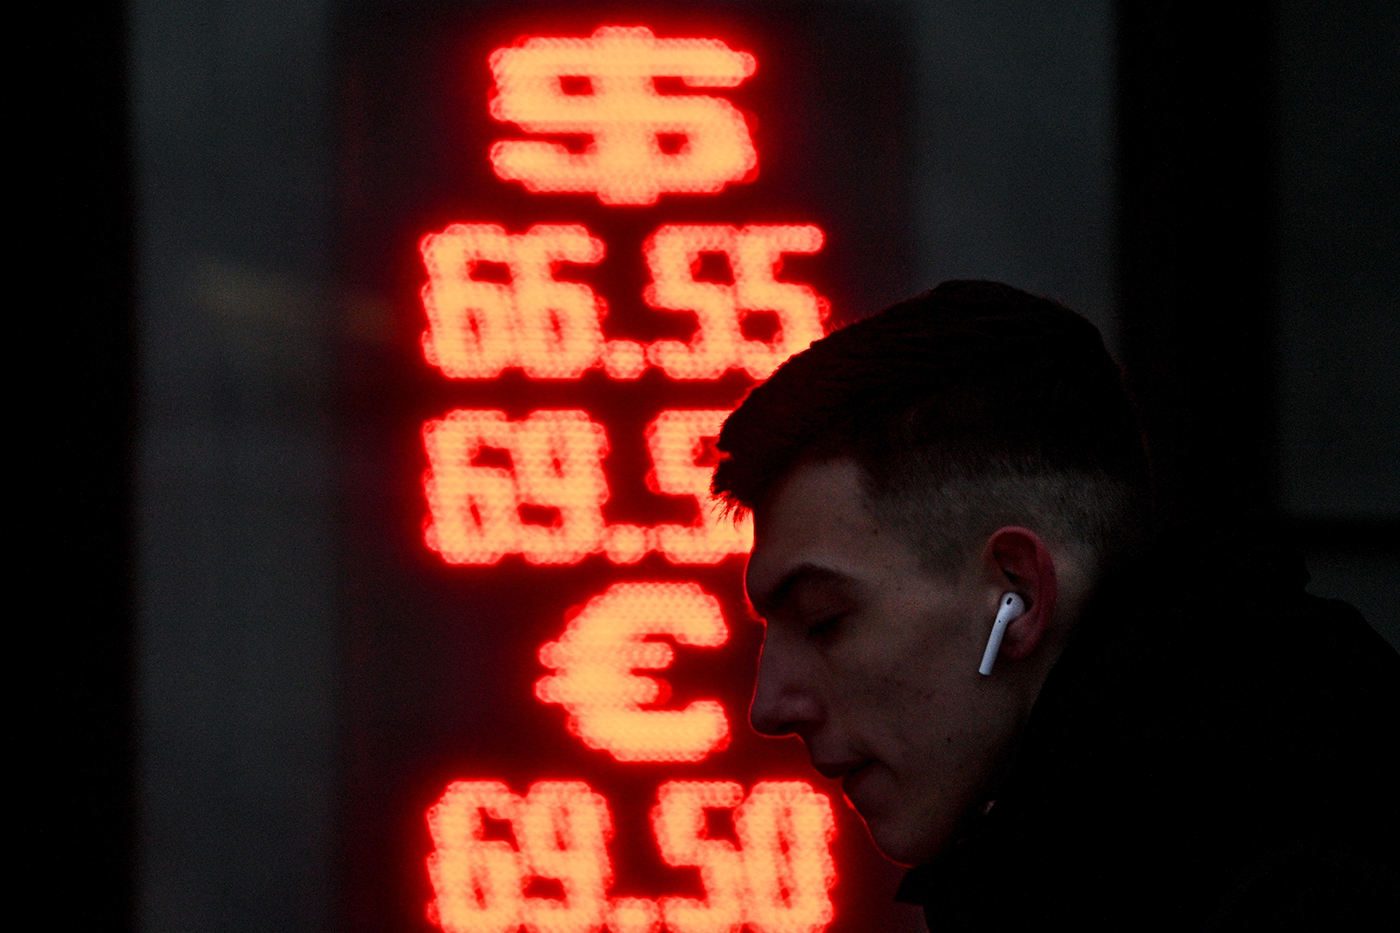 man wearing airpods silhouetted against black screen with red currencies on it